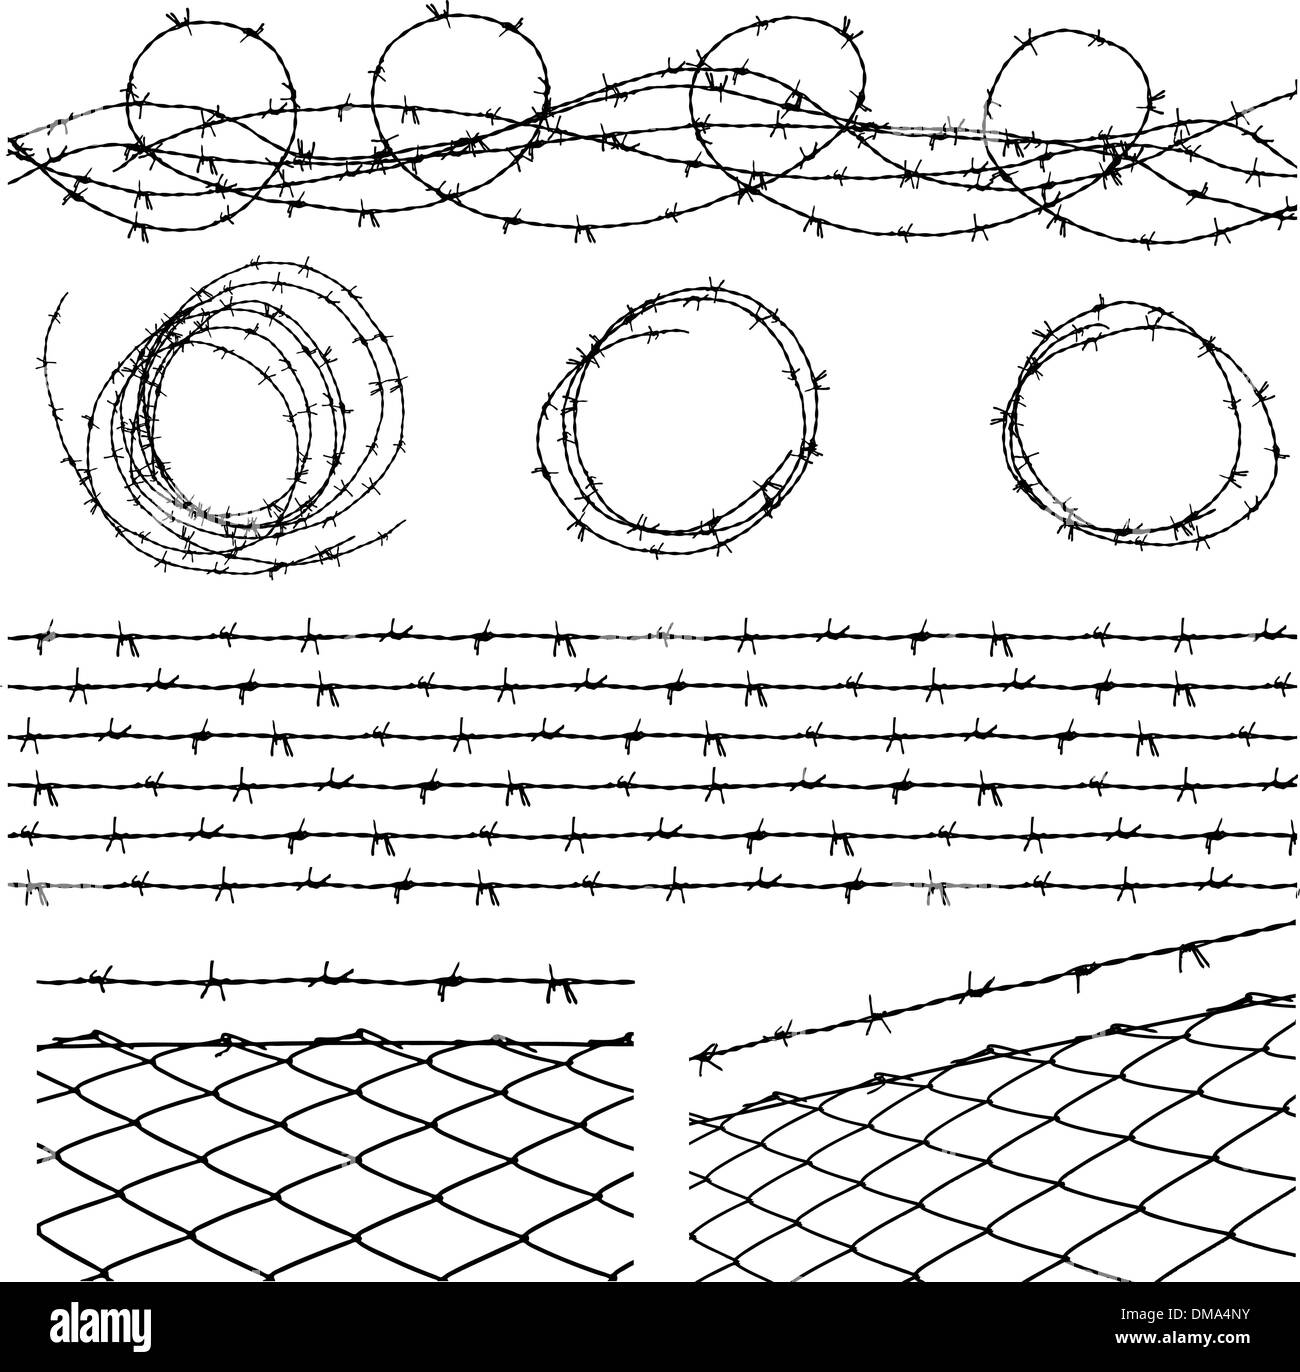 Barbed wire elements Stock Vector